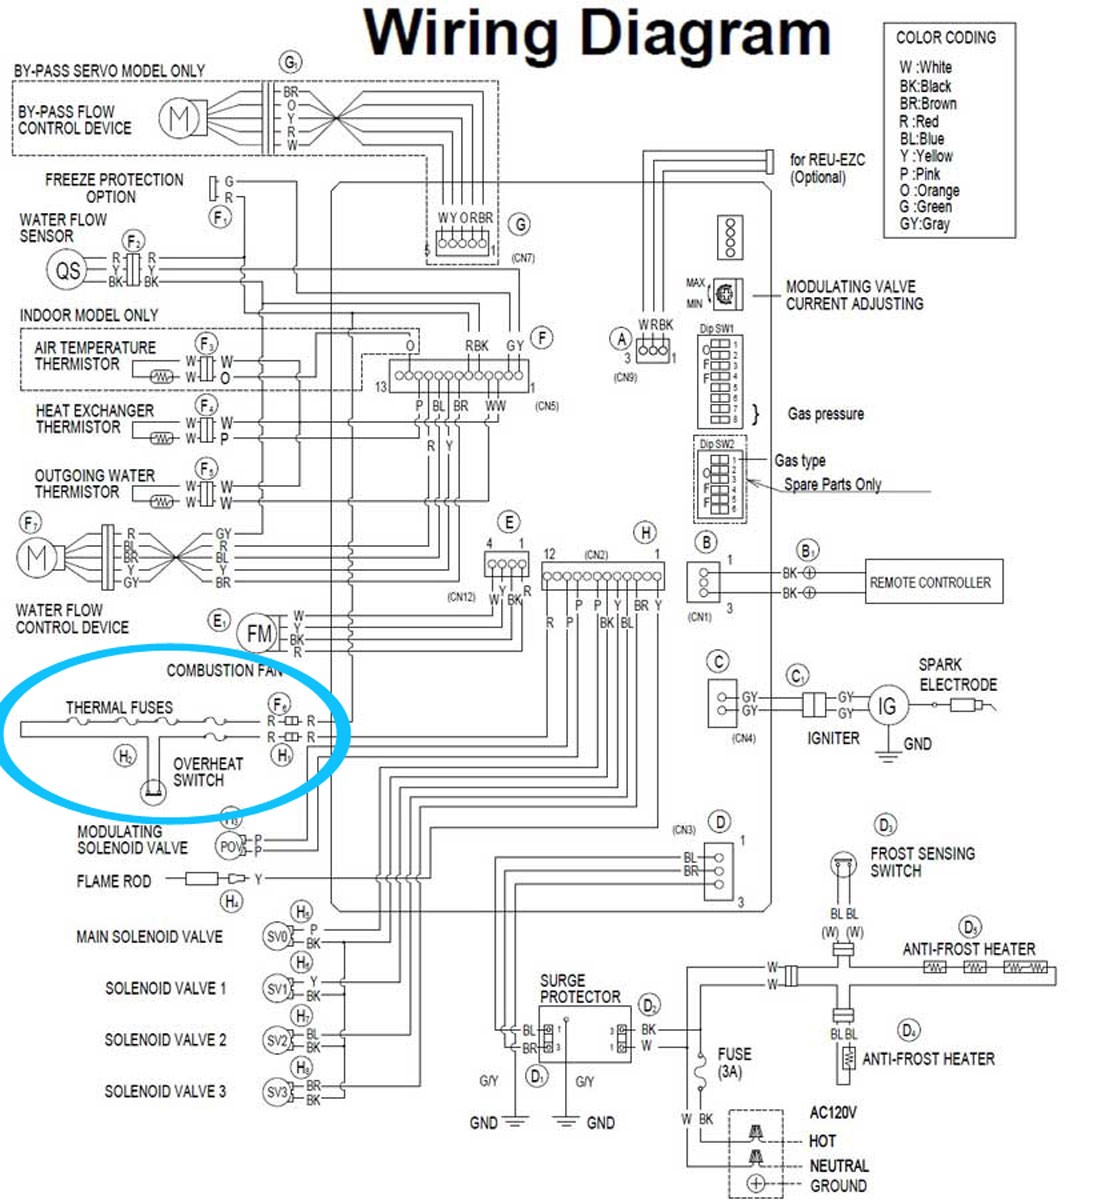 Guard Dog Low Water Cutoff Wiring Diagram Download Check the electric troubleshoot from 2008 pdf